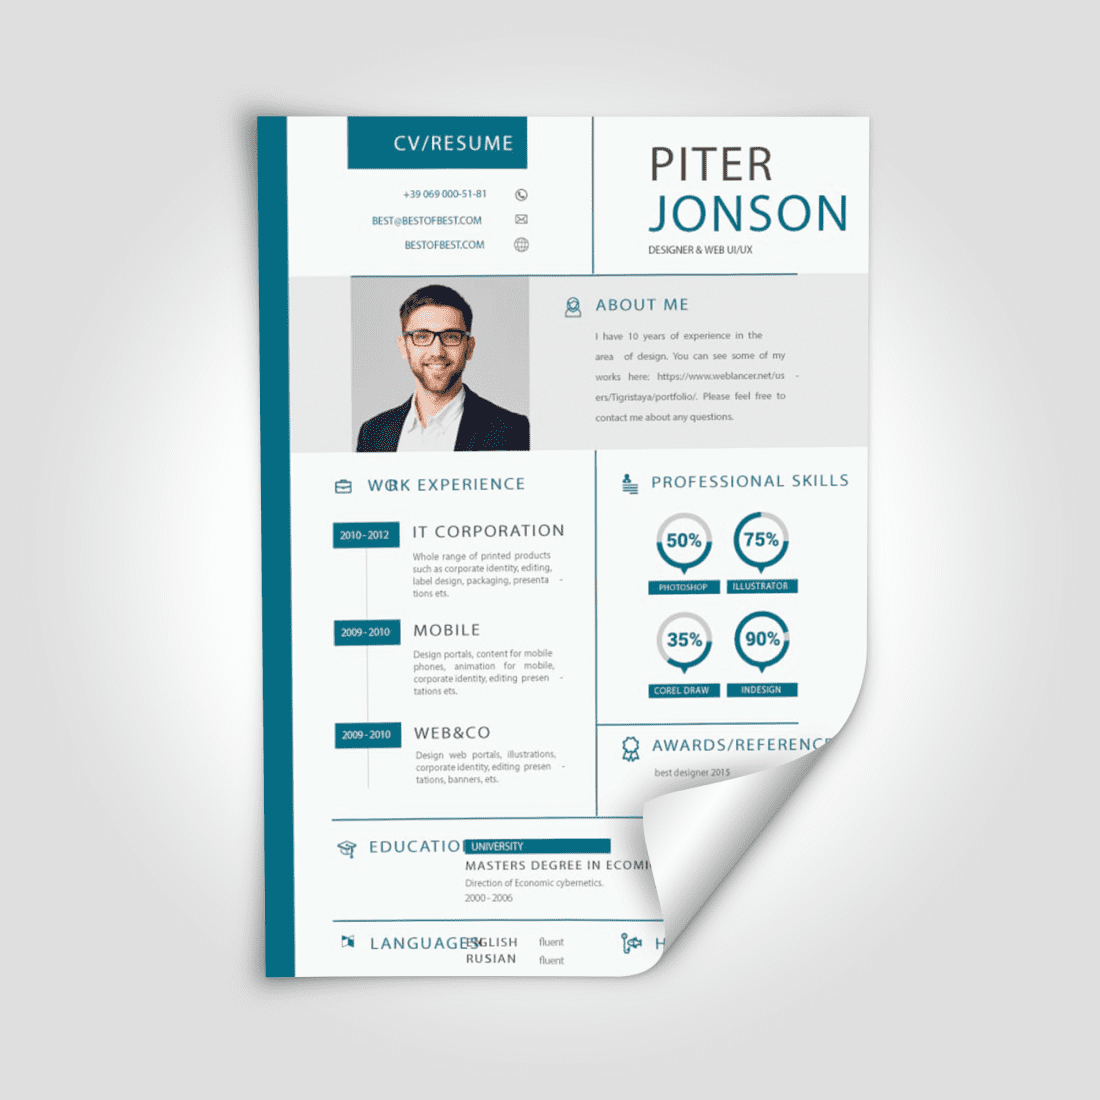 Best Grad Student Resume Templates. Second cover image.